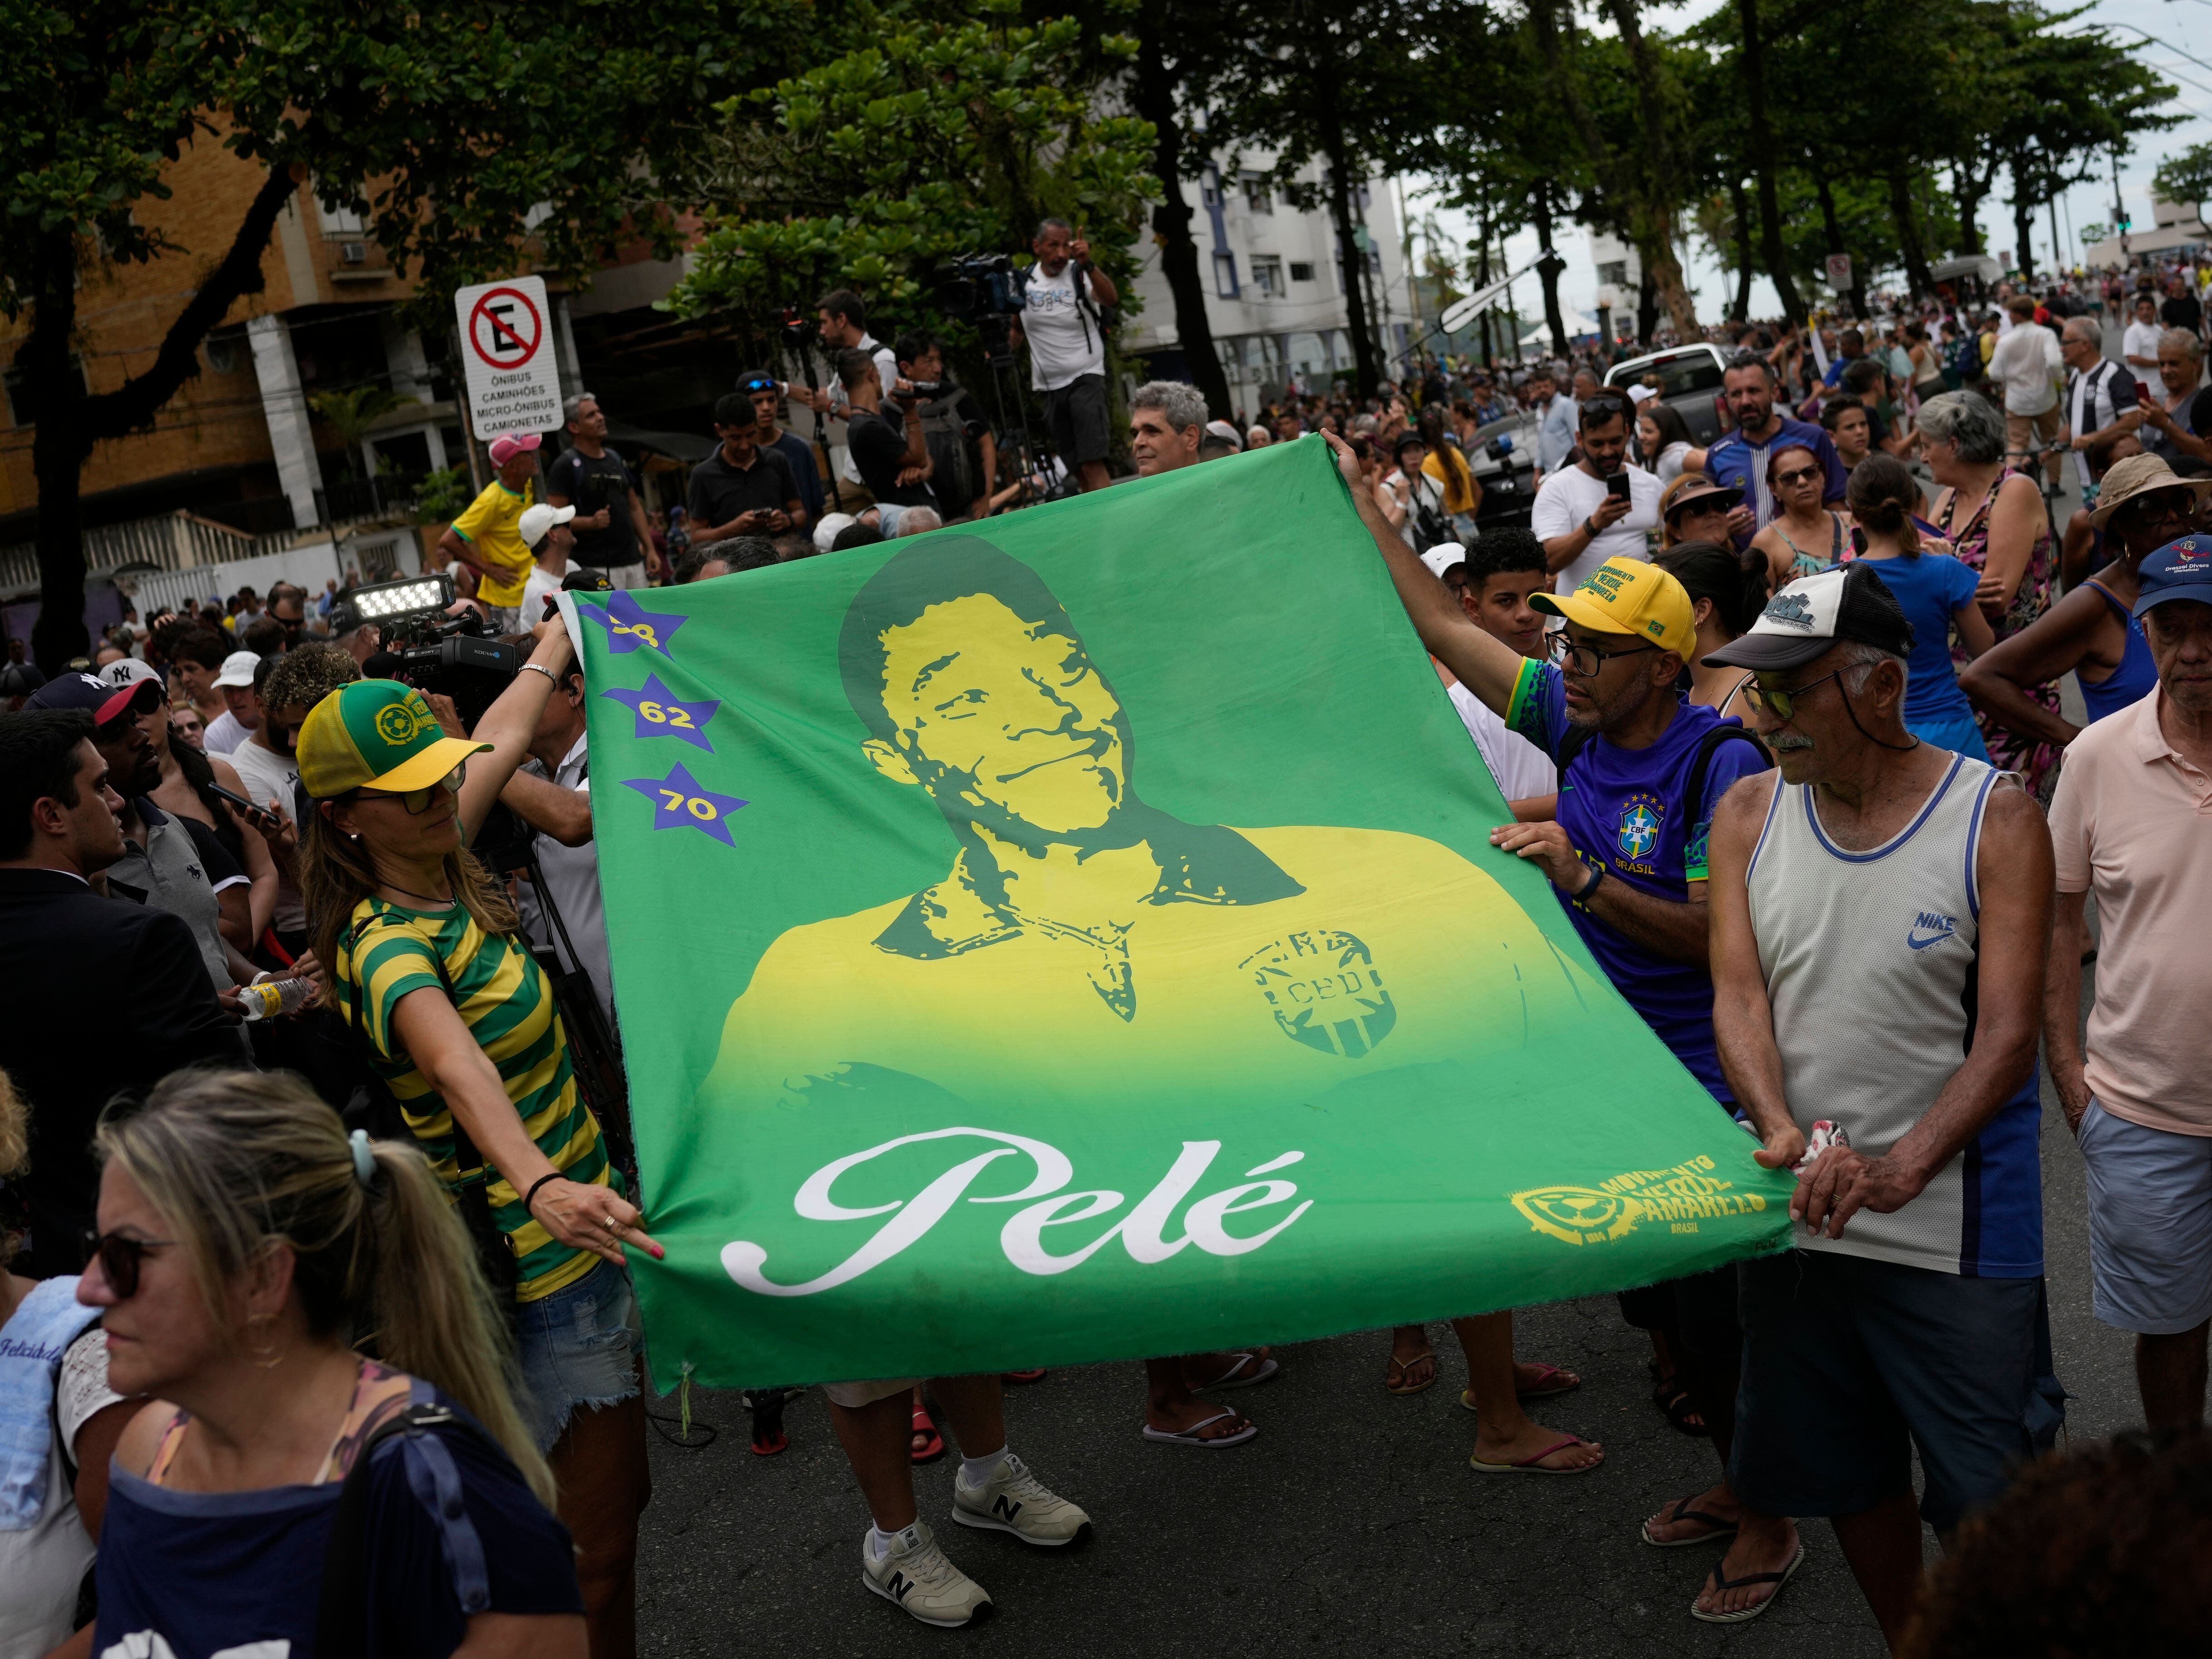 Pele buried at cemetery in Brazilian city he made famous